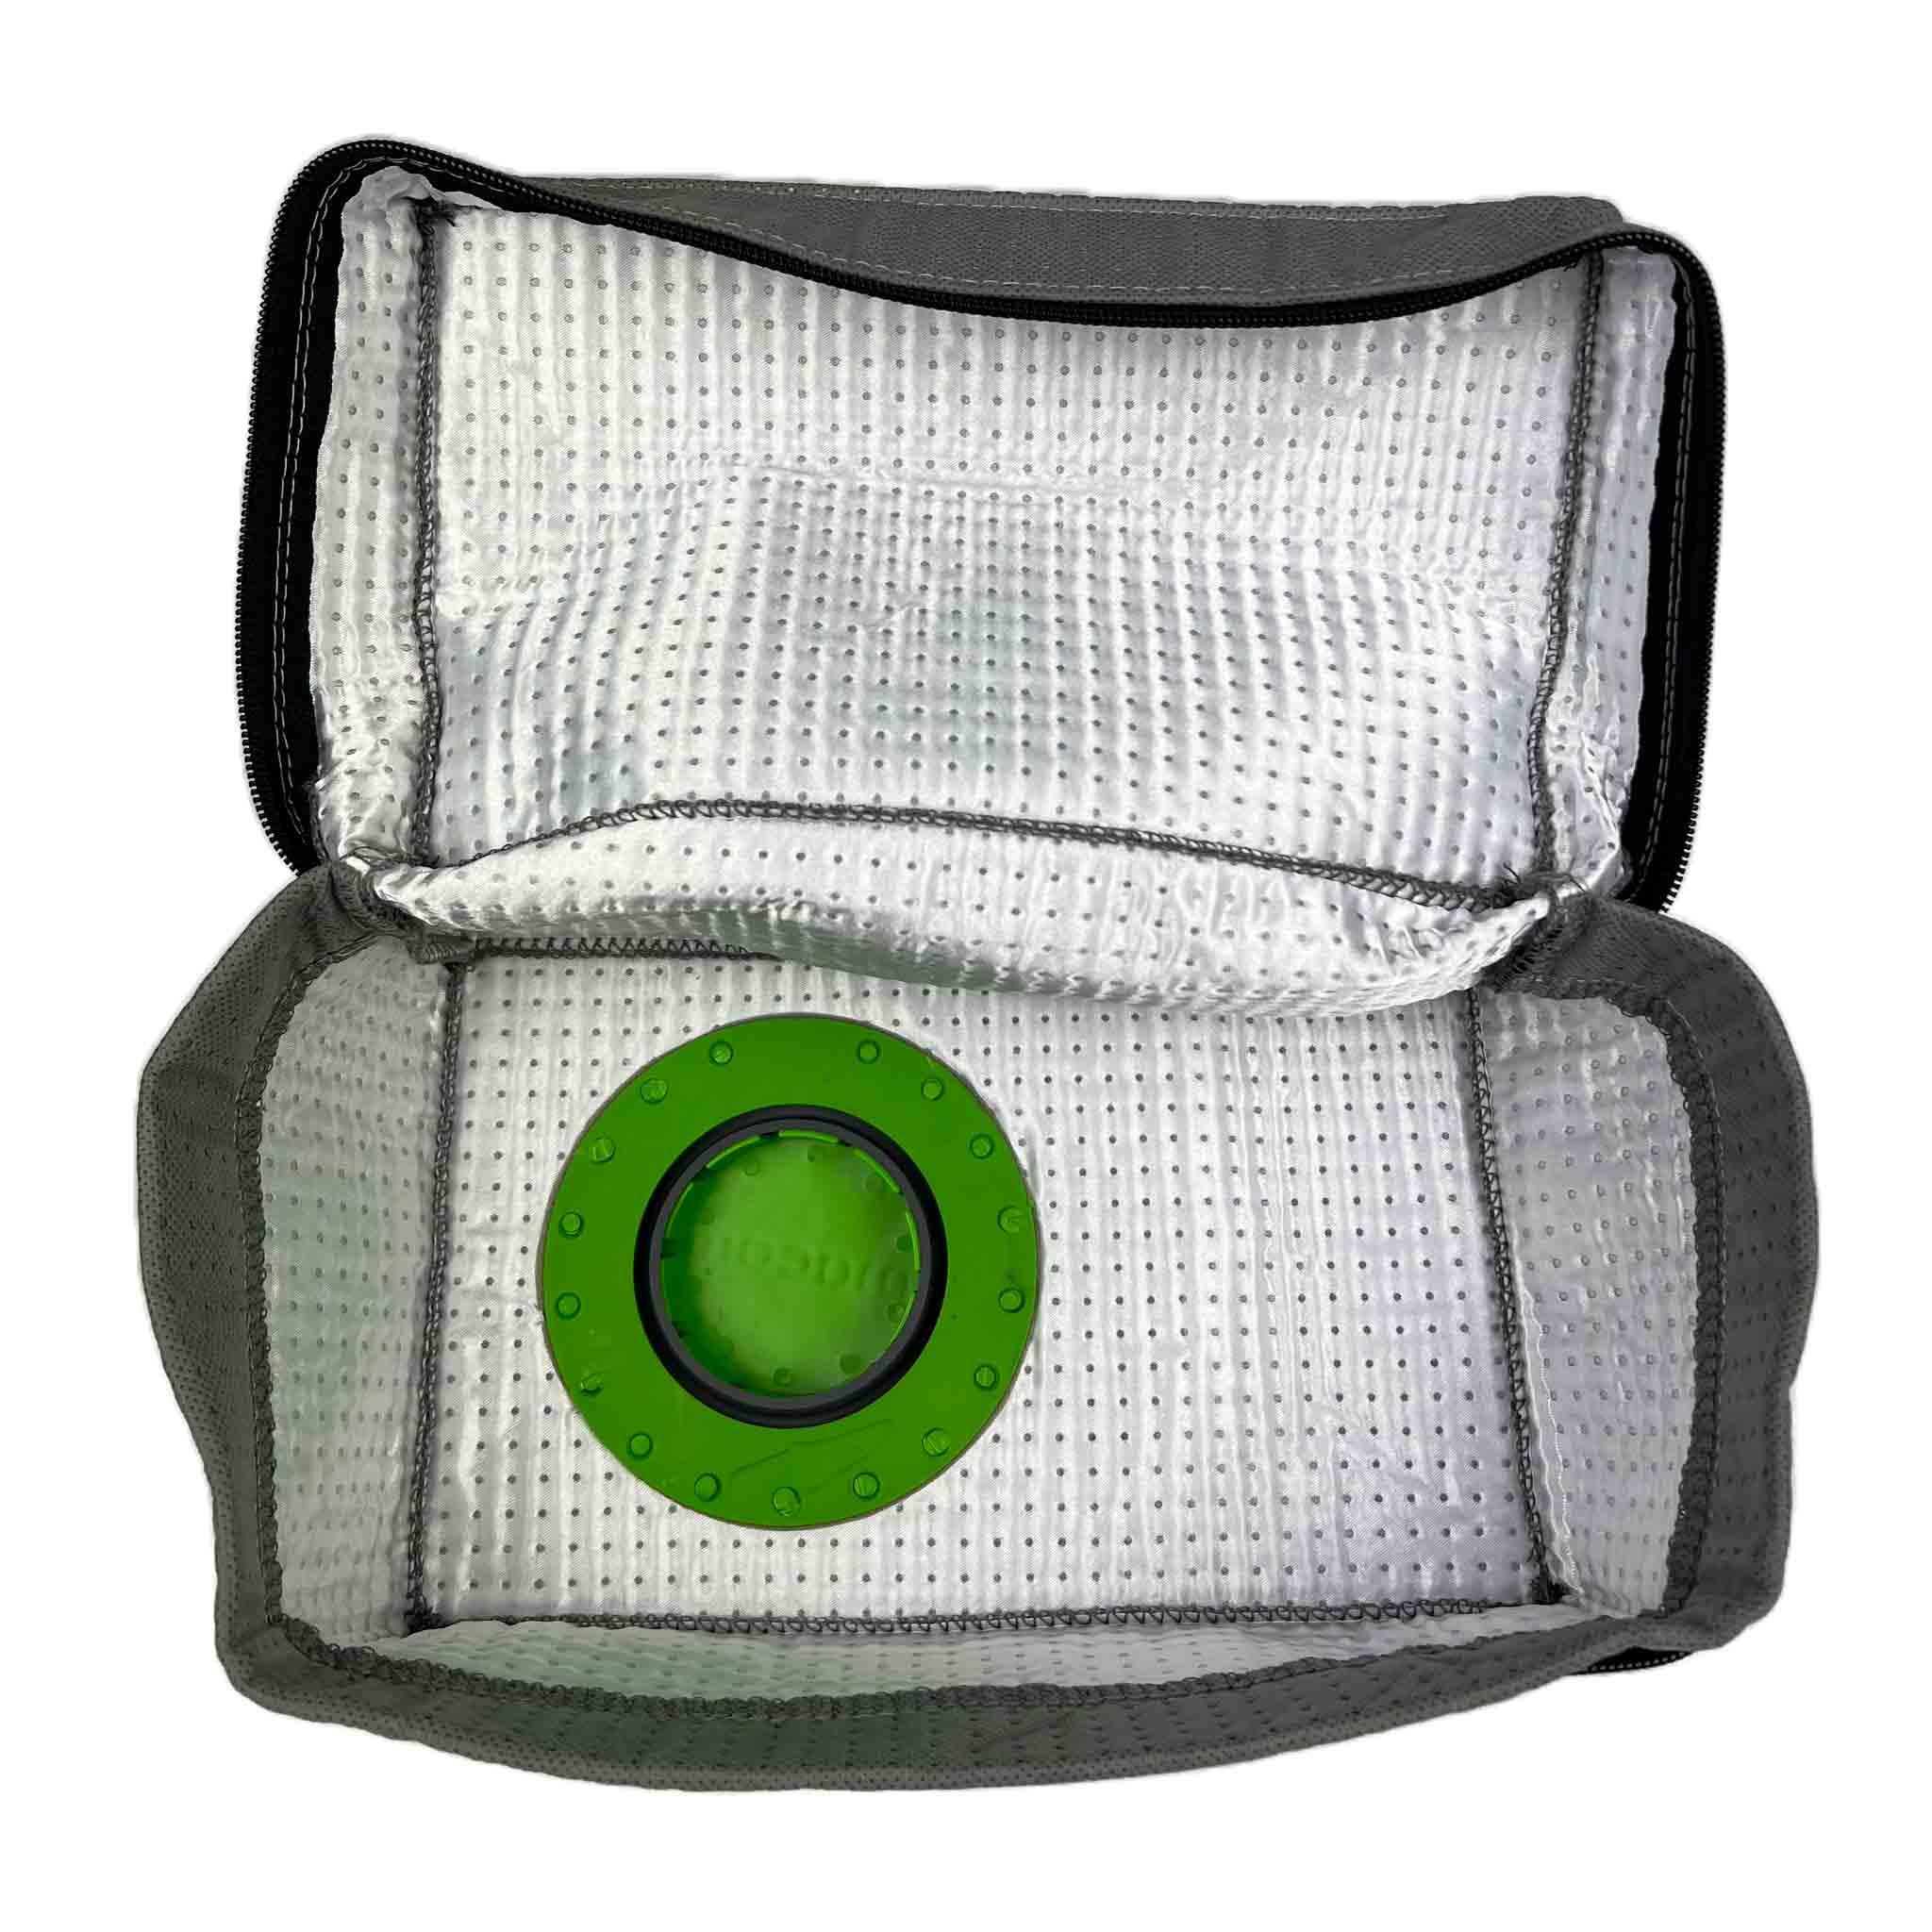 Reusable dust bag for Festool CTL SYS, CTLC SYS and CTMC SYS